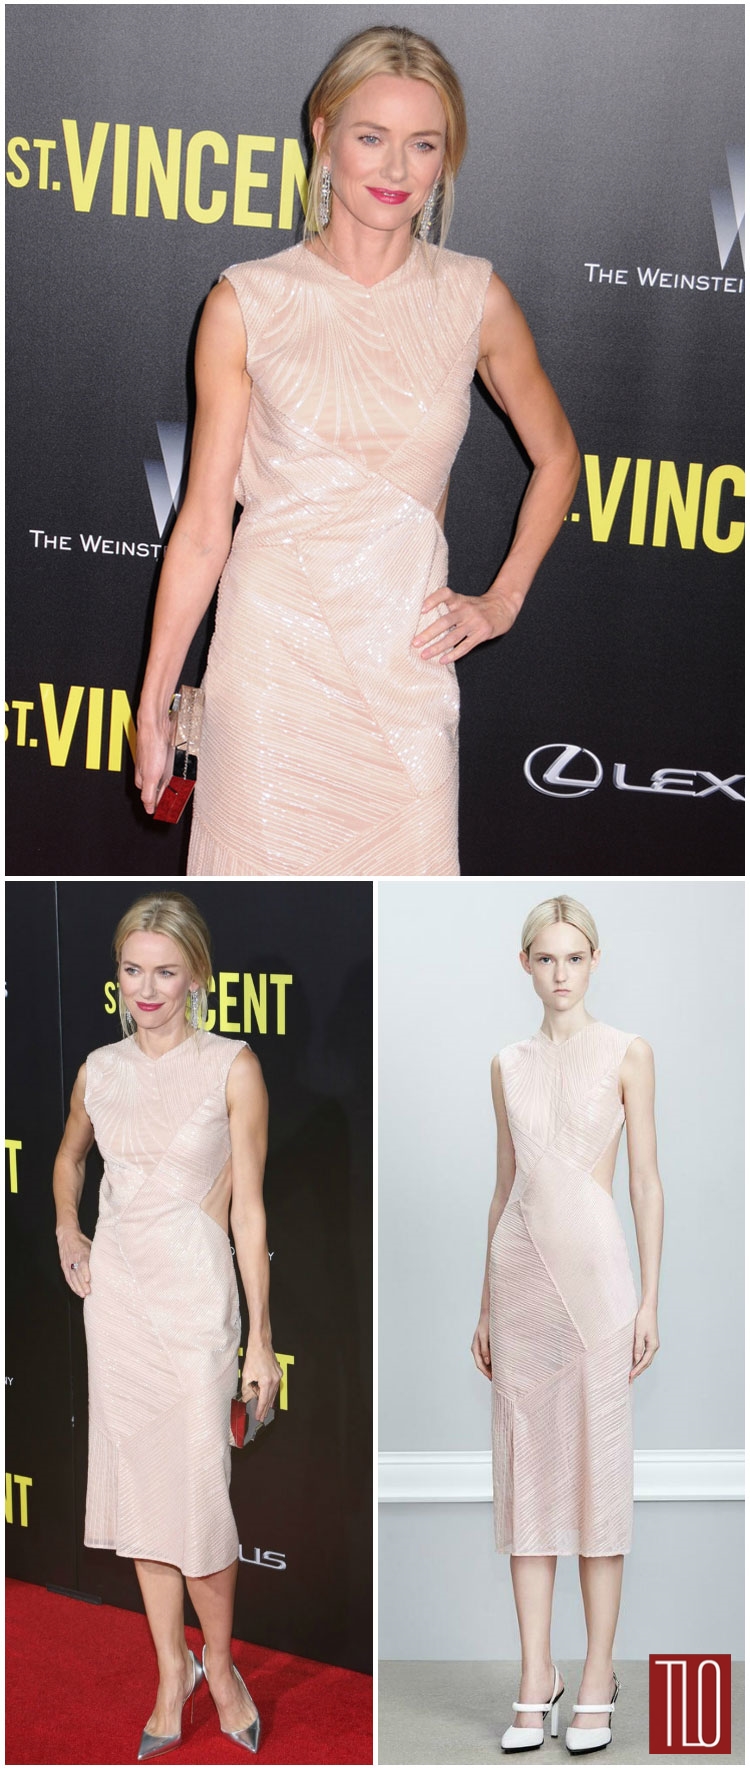 Naomi Watts in Jason Wu at the St. Vincent NYC Premiere 